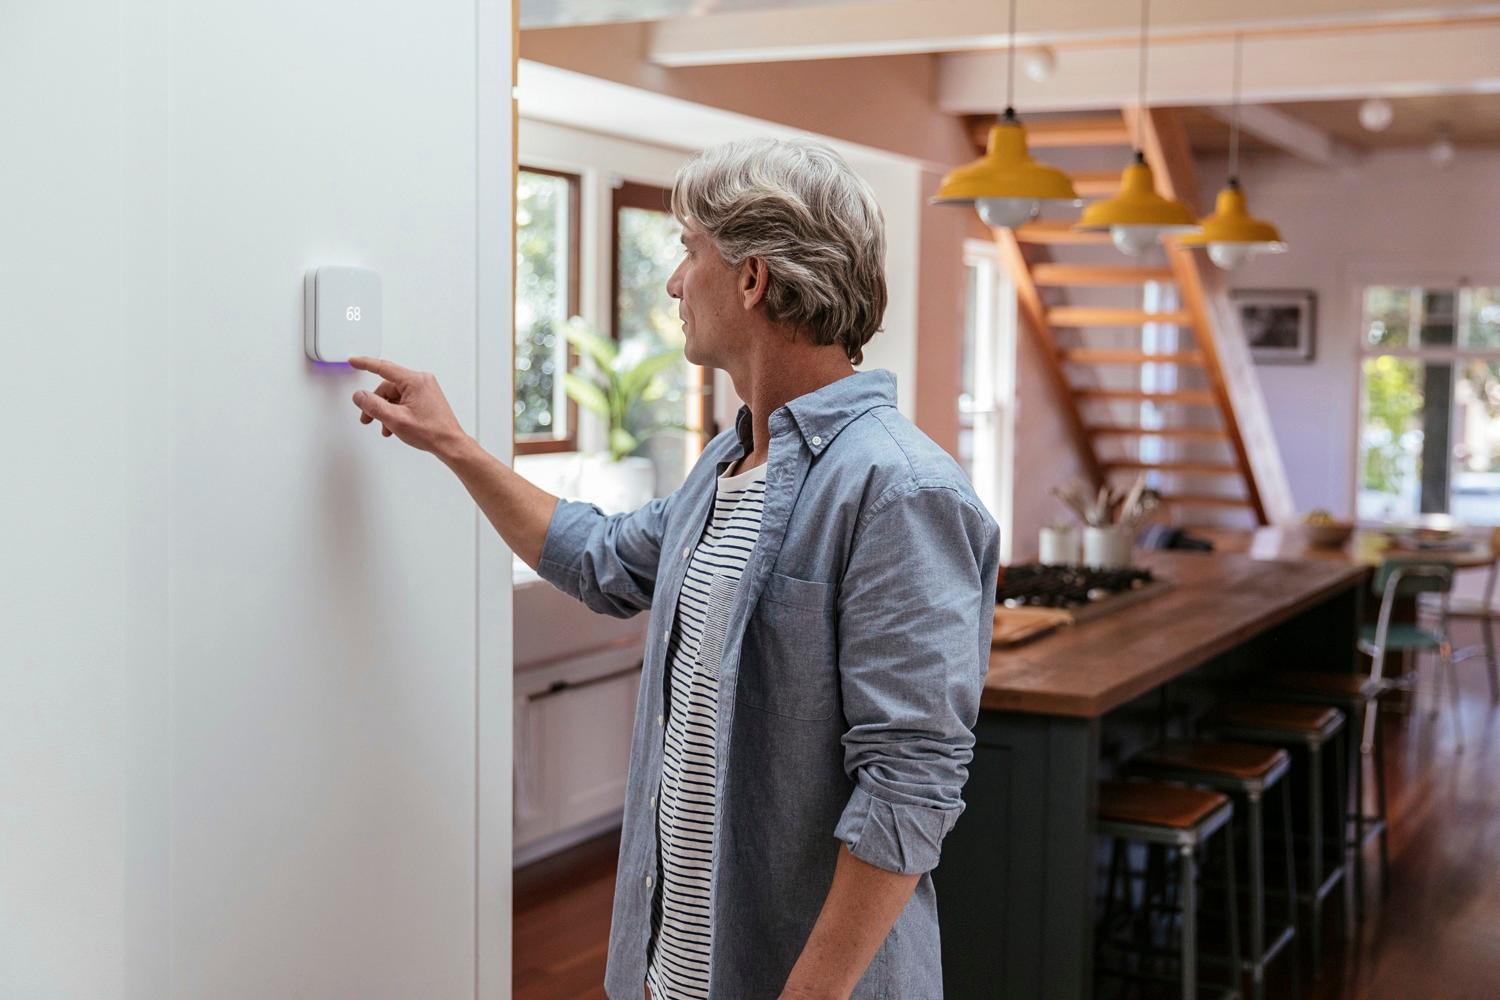 How To Use Pre-wired Home Security With Smart Sensor